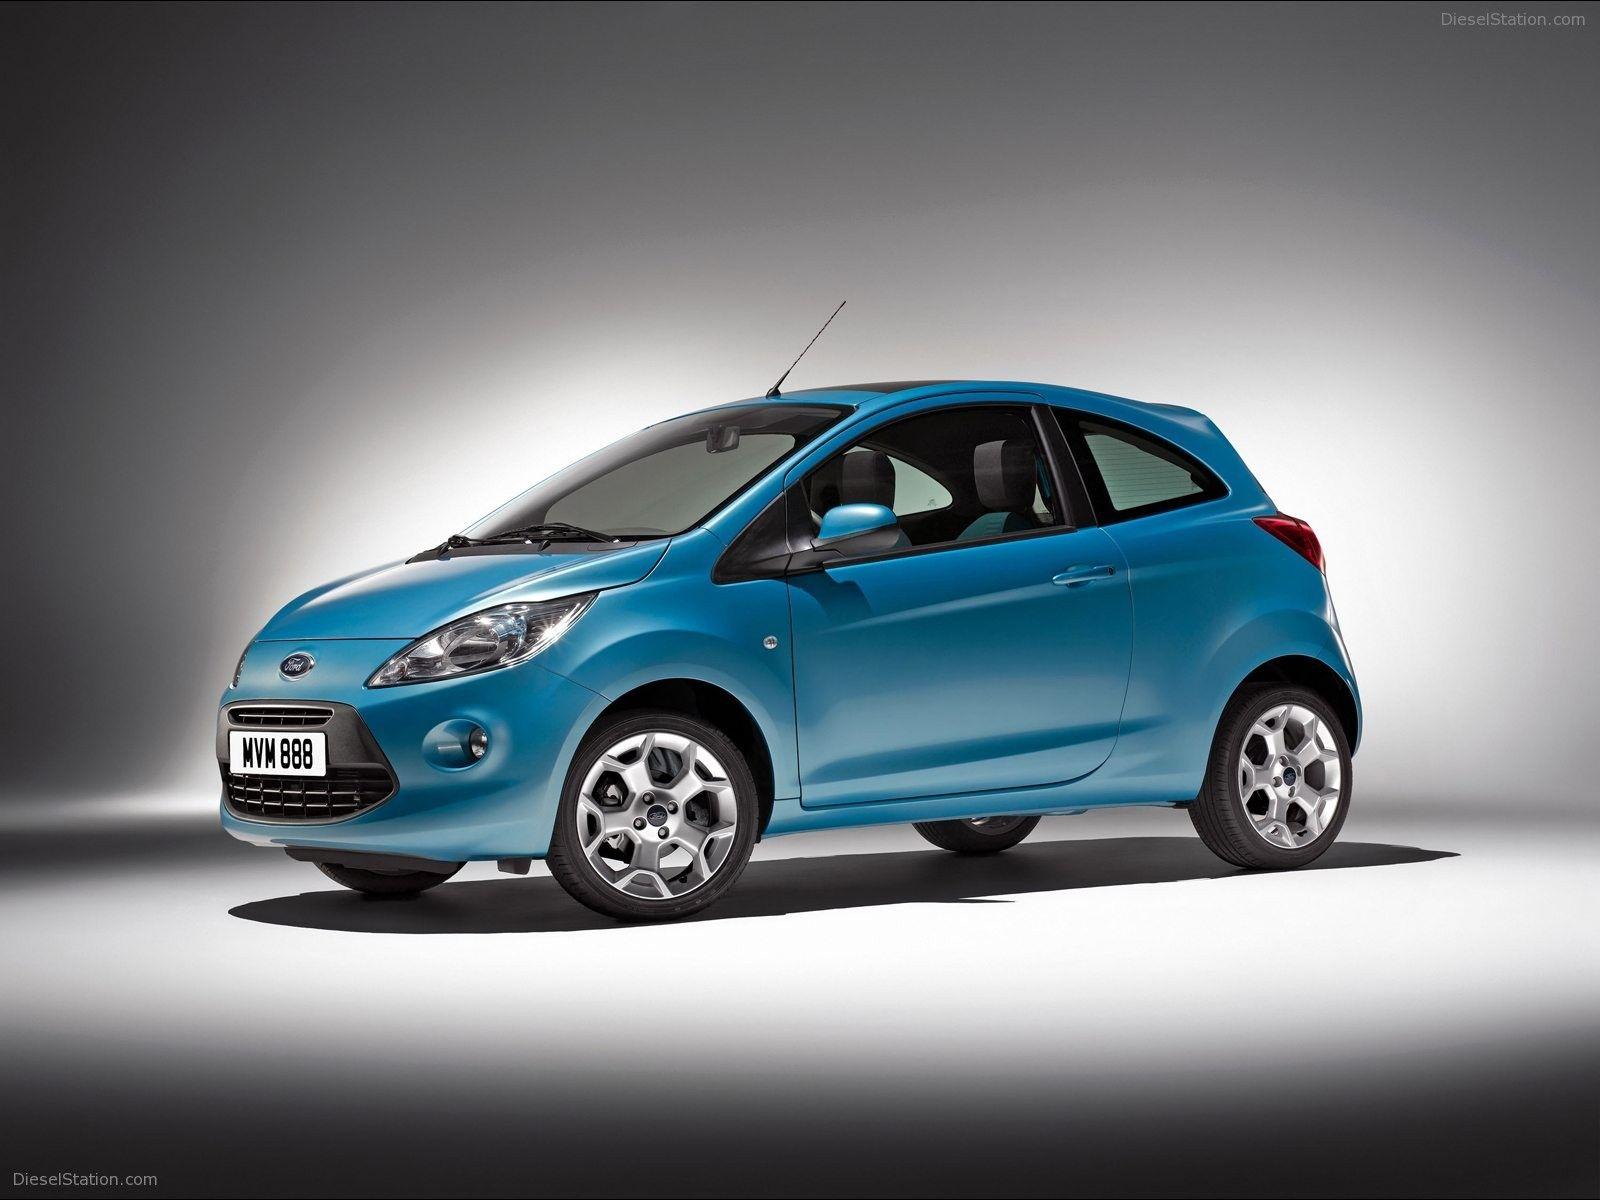 Ford KA Exotic Car Wallpapers of  Diesel Station